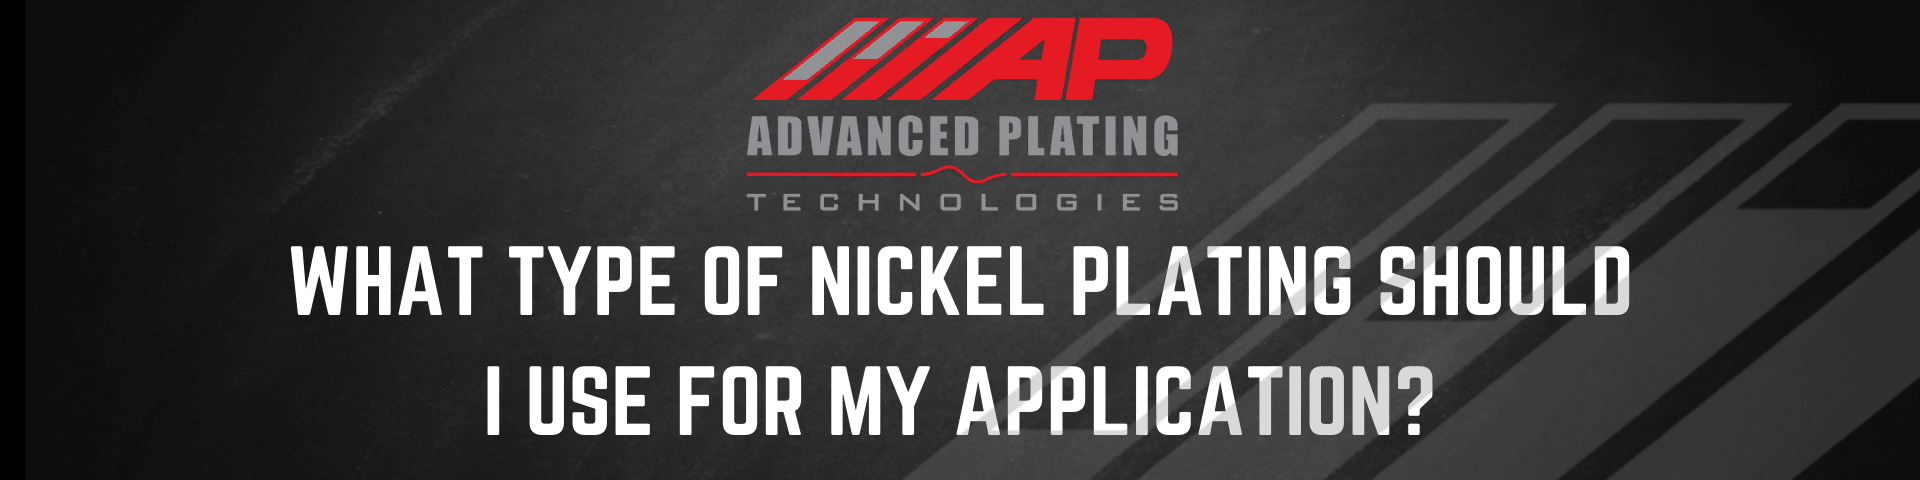 WHAT TYPE OF NICKEL PLATING SHOULD I USE FOR MY APPLICATION